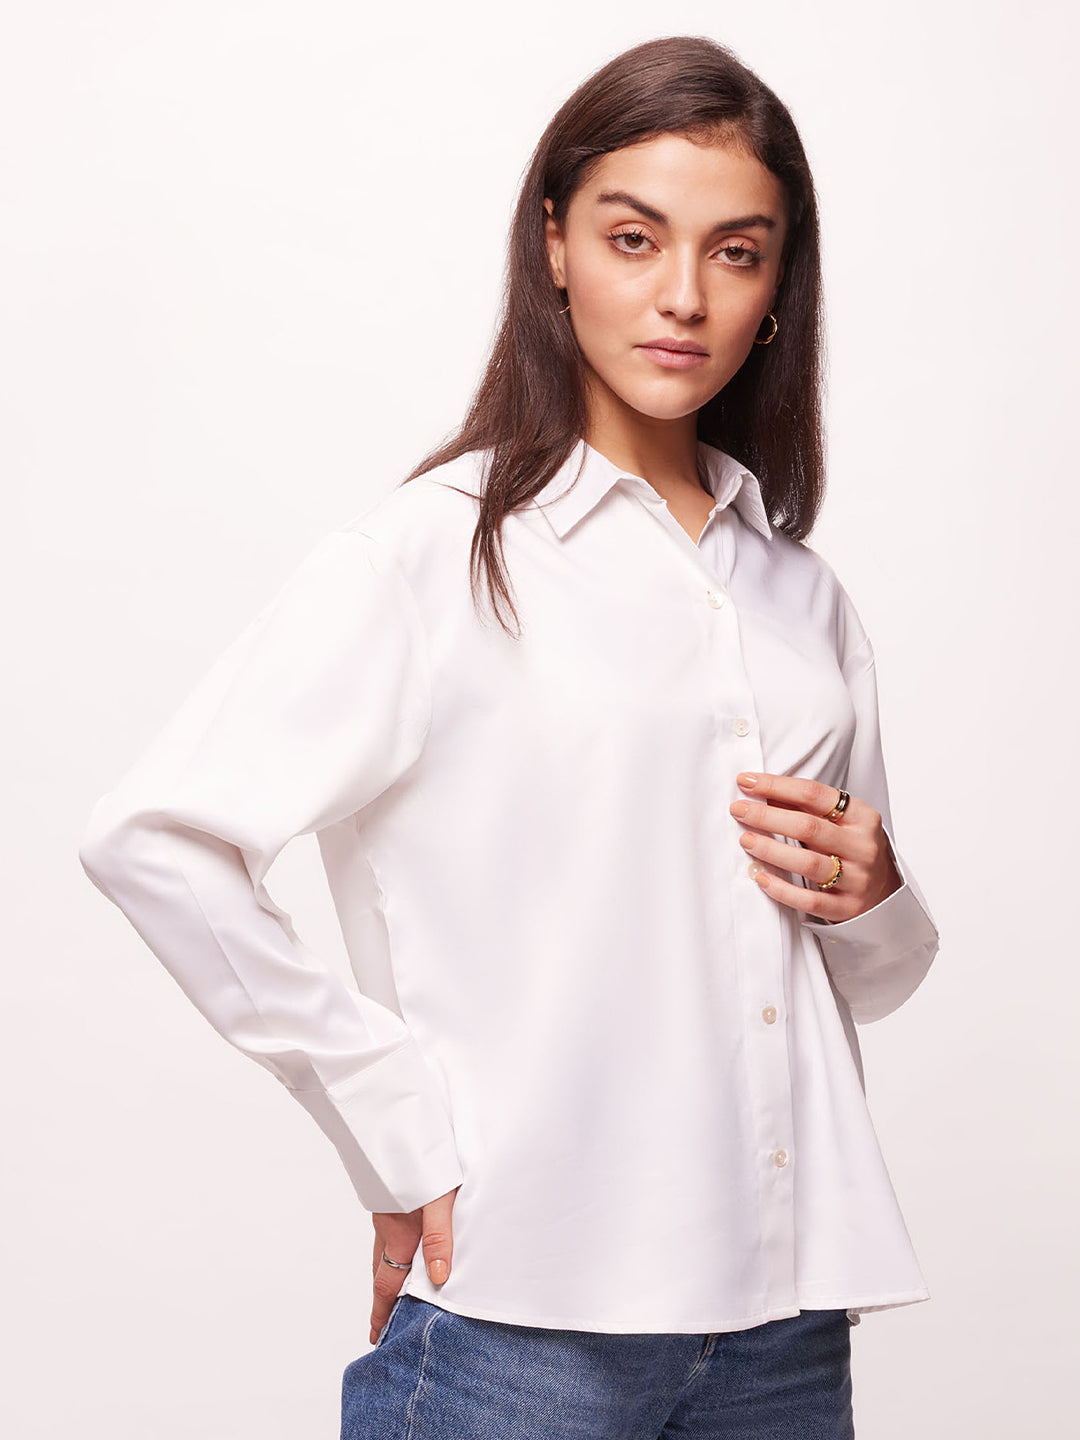 Bombay High Women's Pearl White Solid Satin Shirt